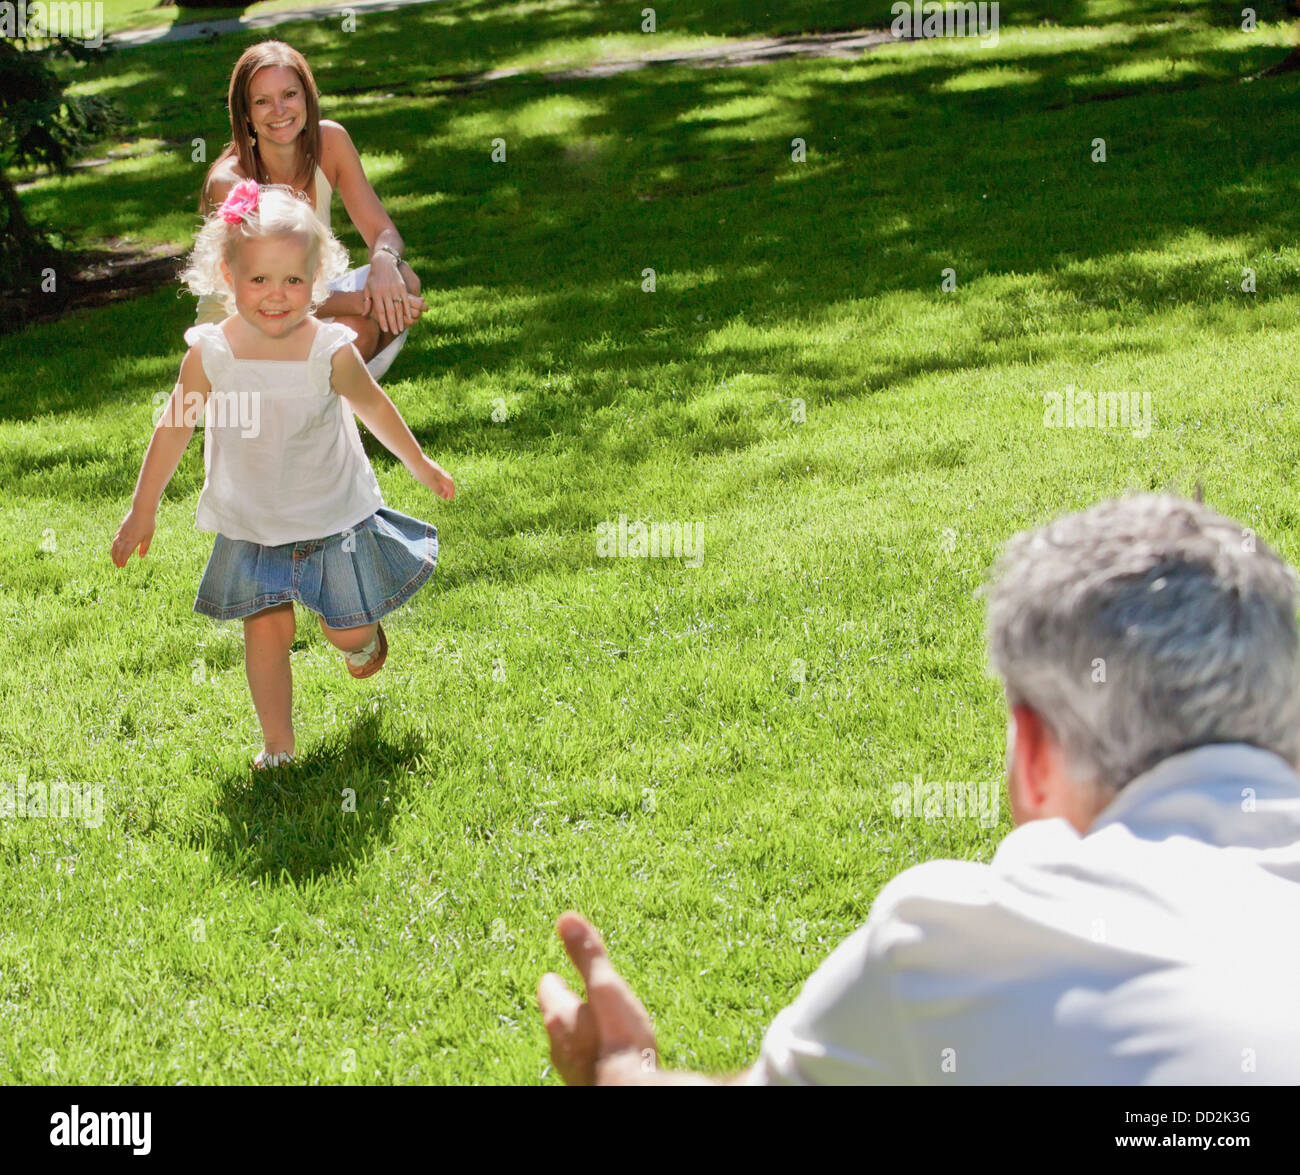 Young Girl Running To Her Father In A Park; Edmonton, Alberta, Canada Stock Photo